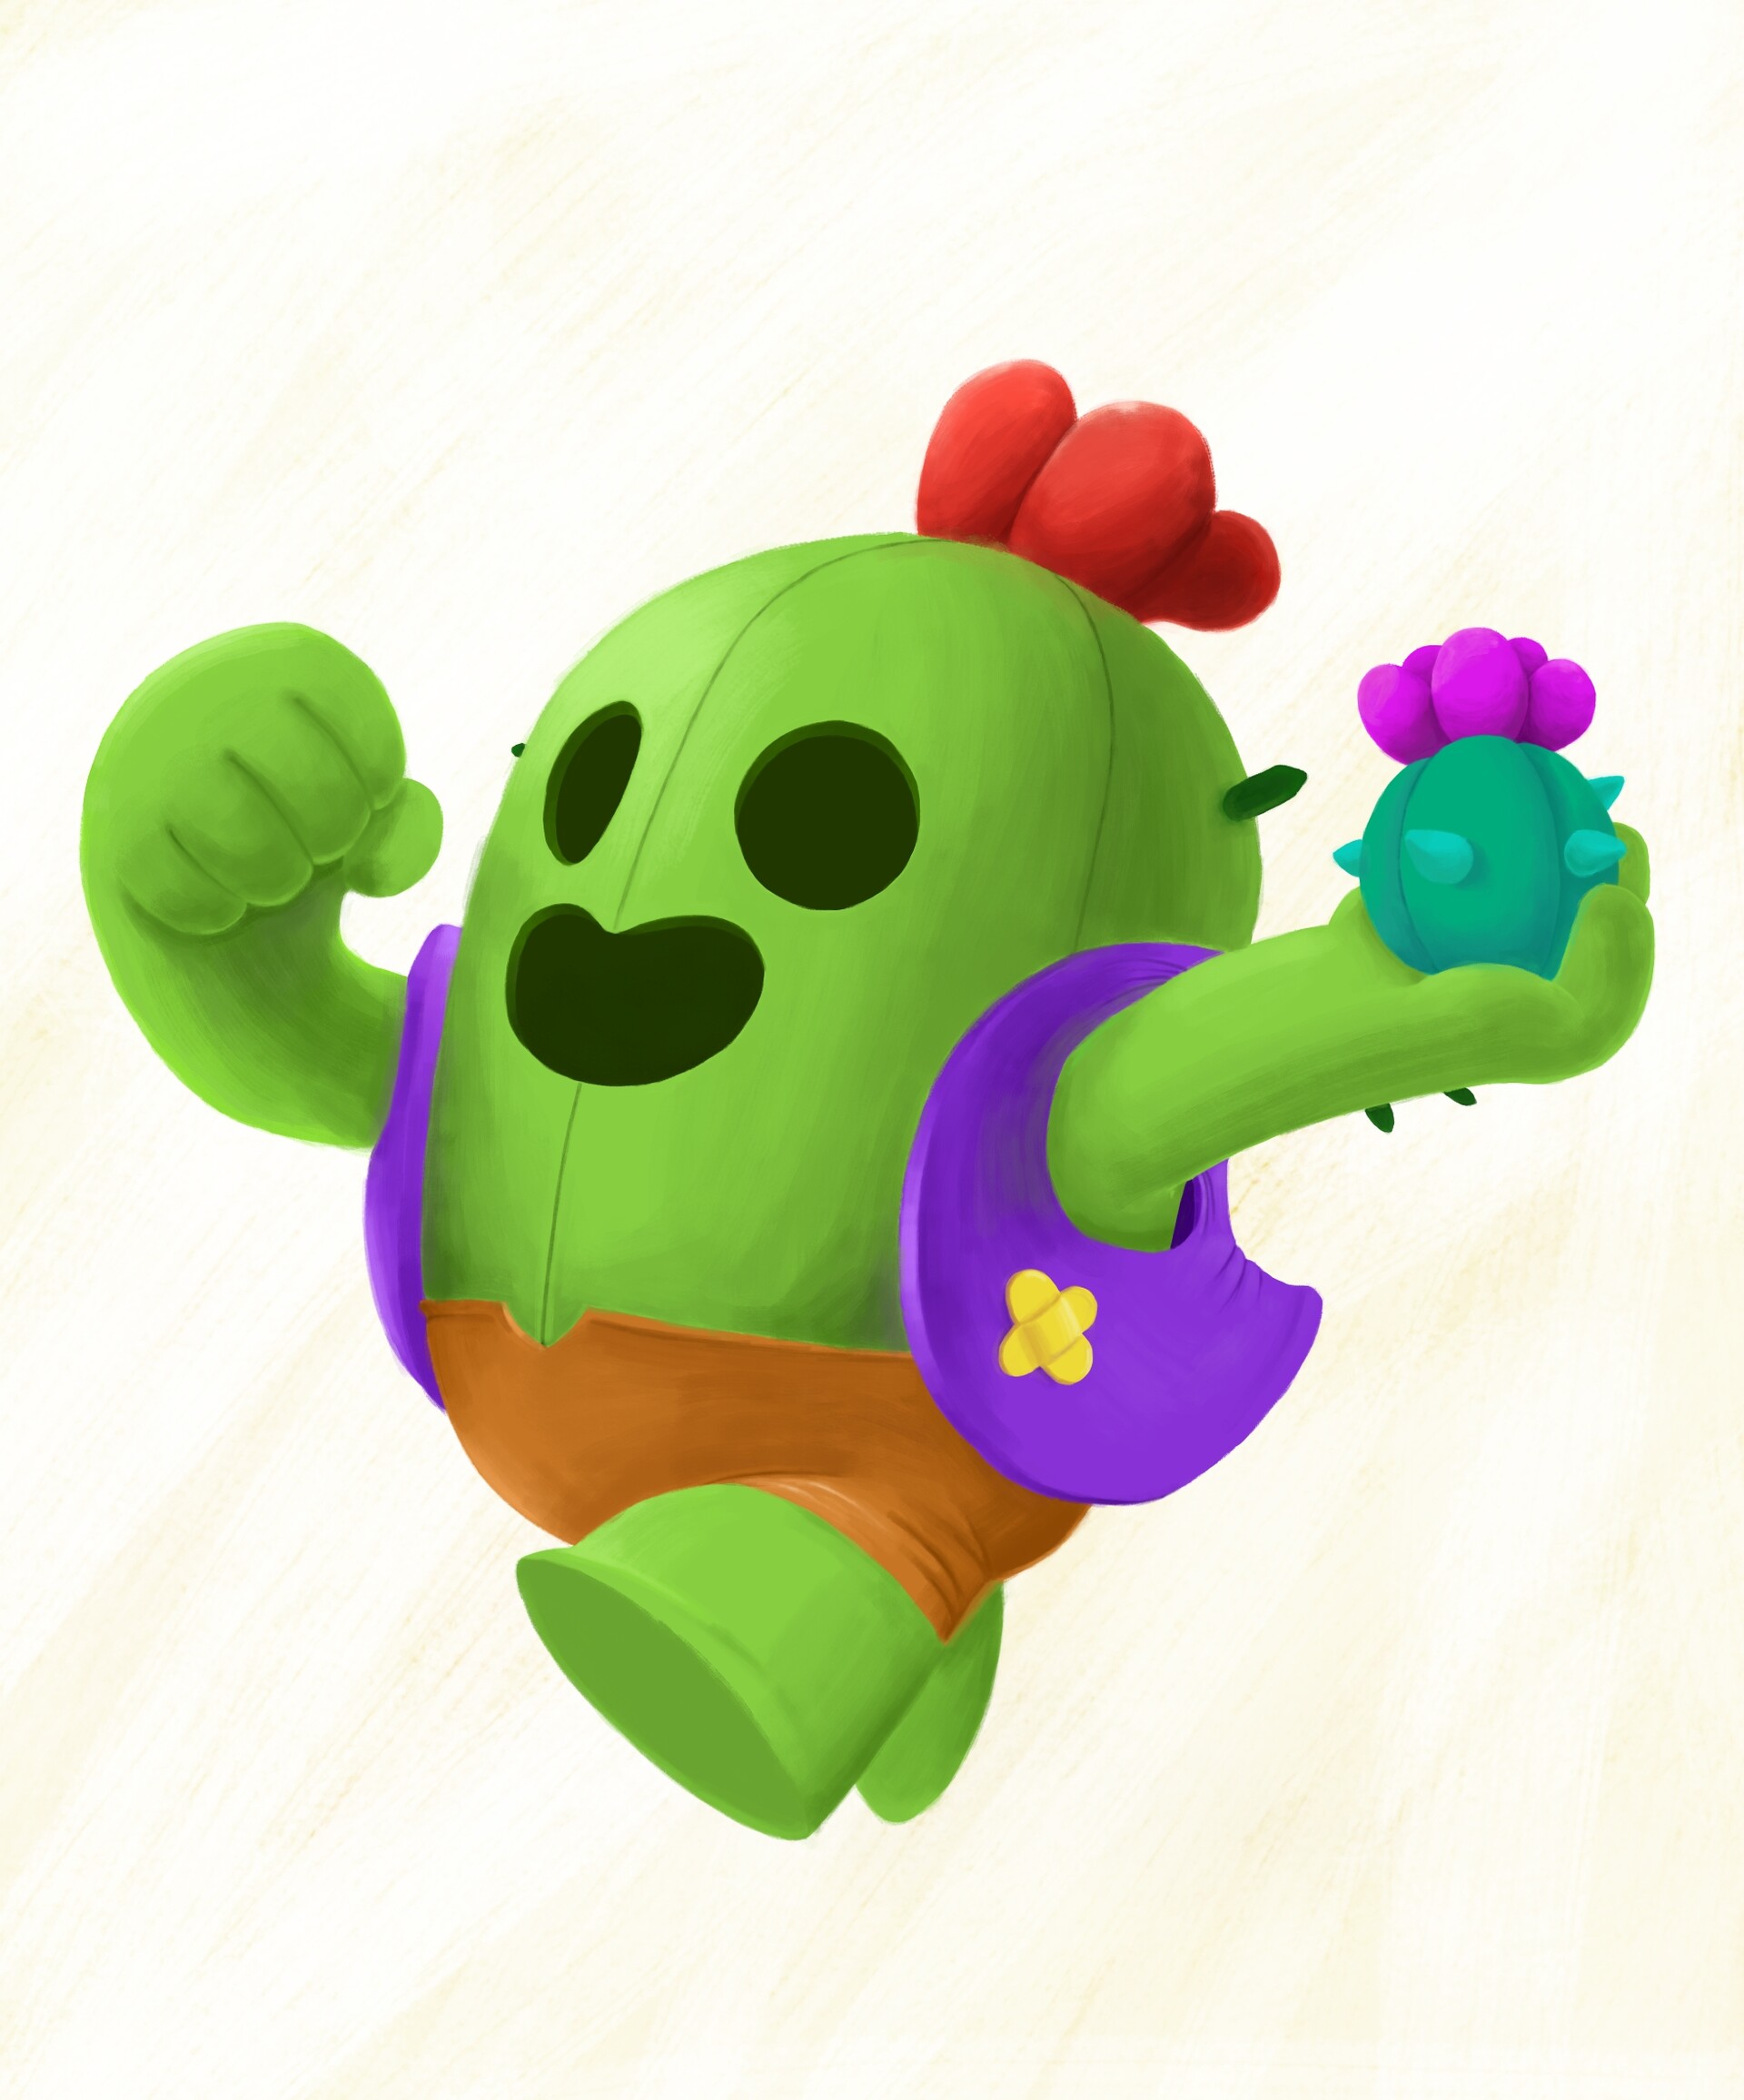 This is Spike, from the mobile game Brawl Stars developed by Supercell. 